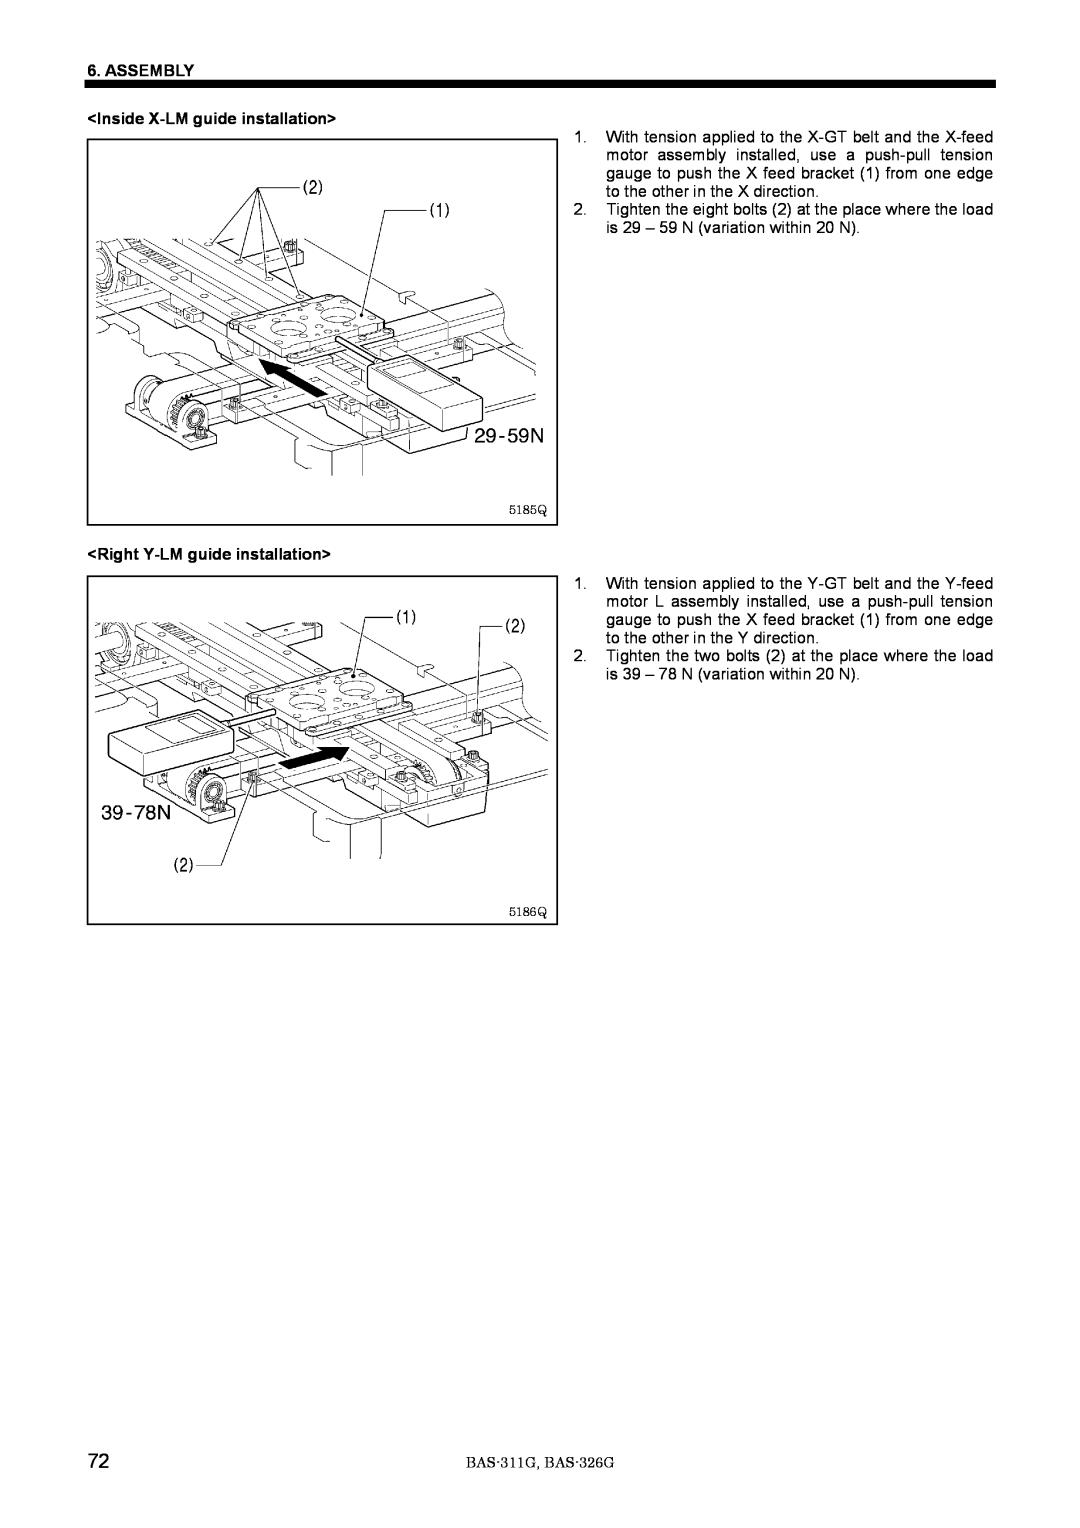 Brother BAS-311G service manual Assembly, Inside X-LM guide installation, Right Y-LM guide installation, 5185Q, 5186Q 